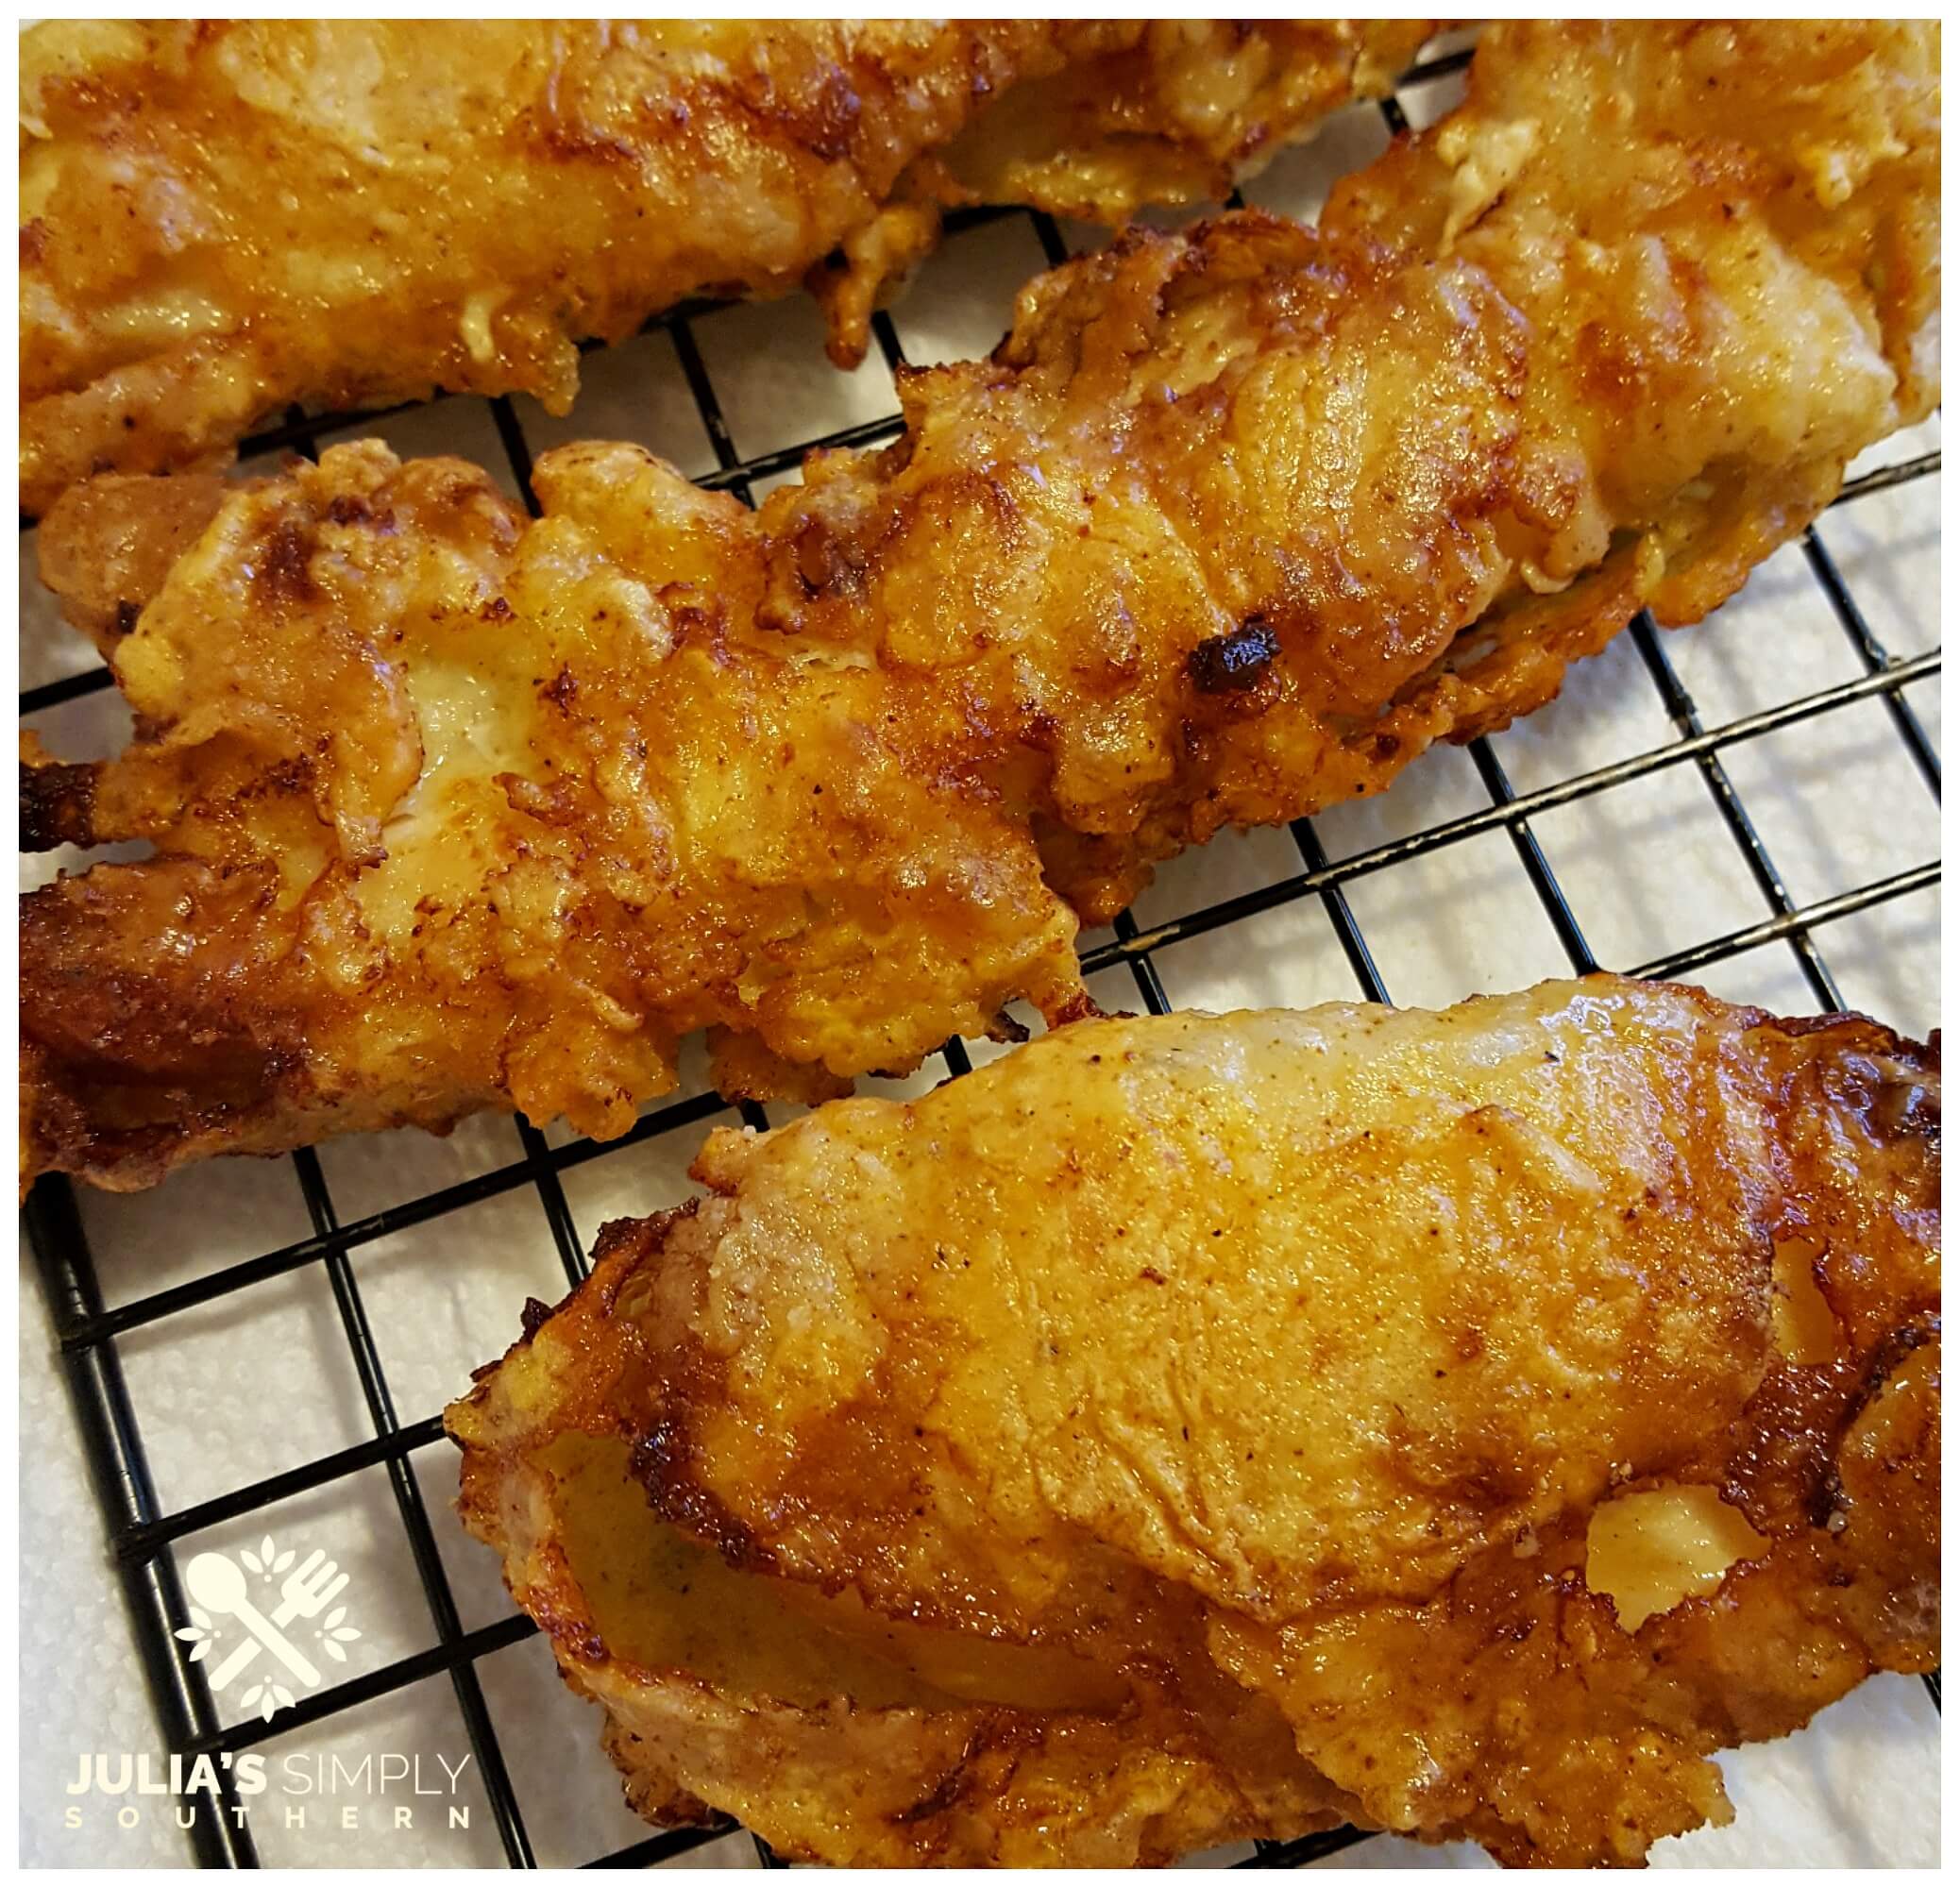 Remove excess oil from fried chicken tenders